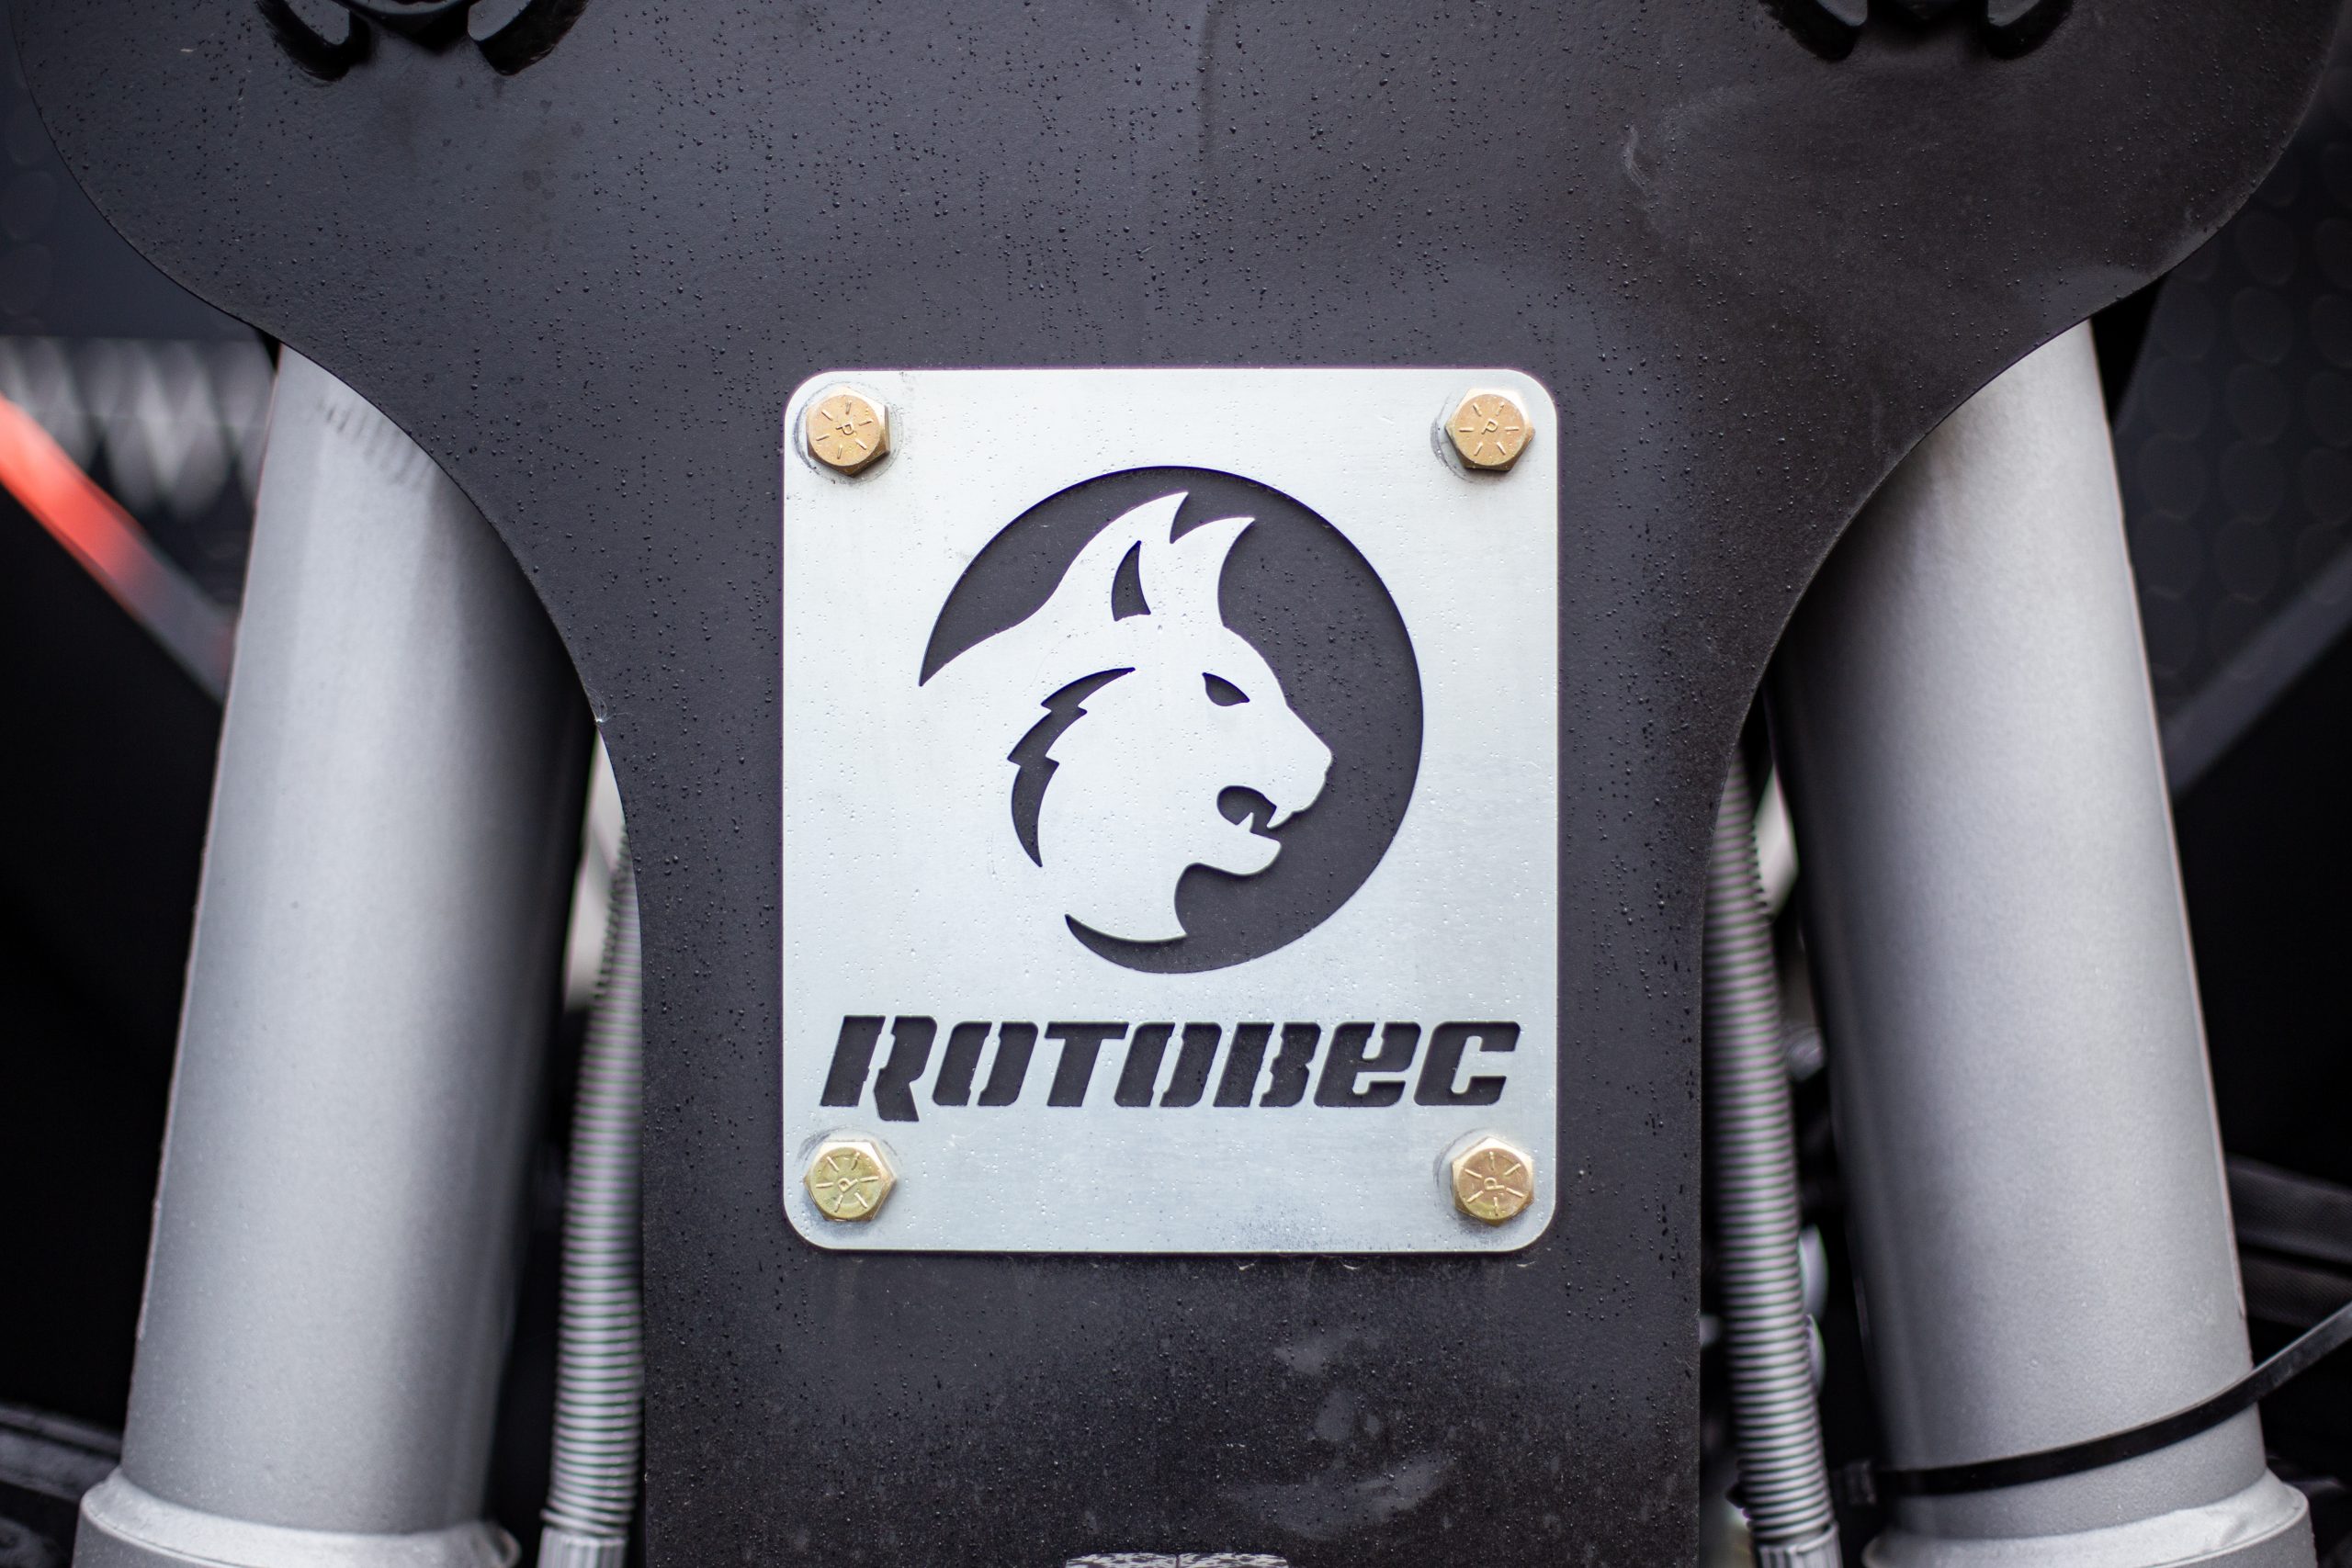 Rotobec logo on the front side of a grapple made of tough metal.